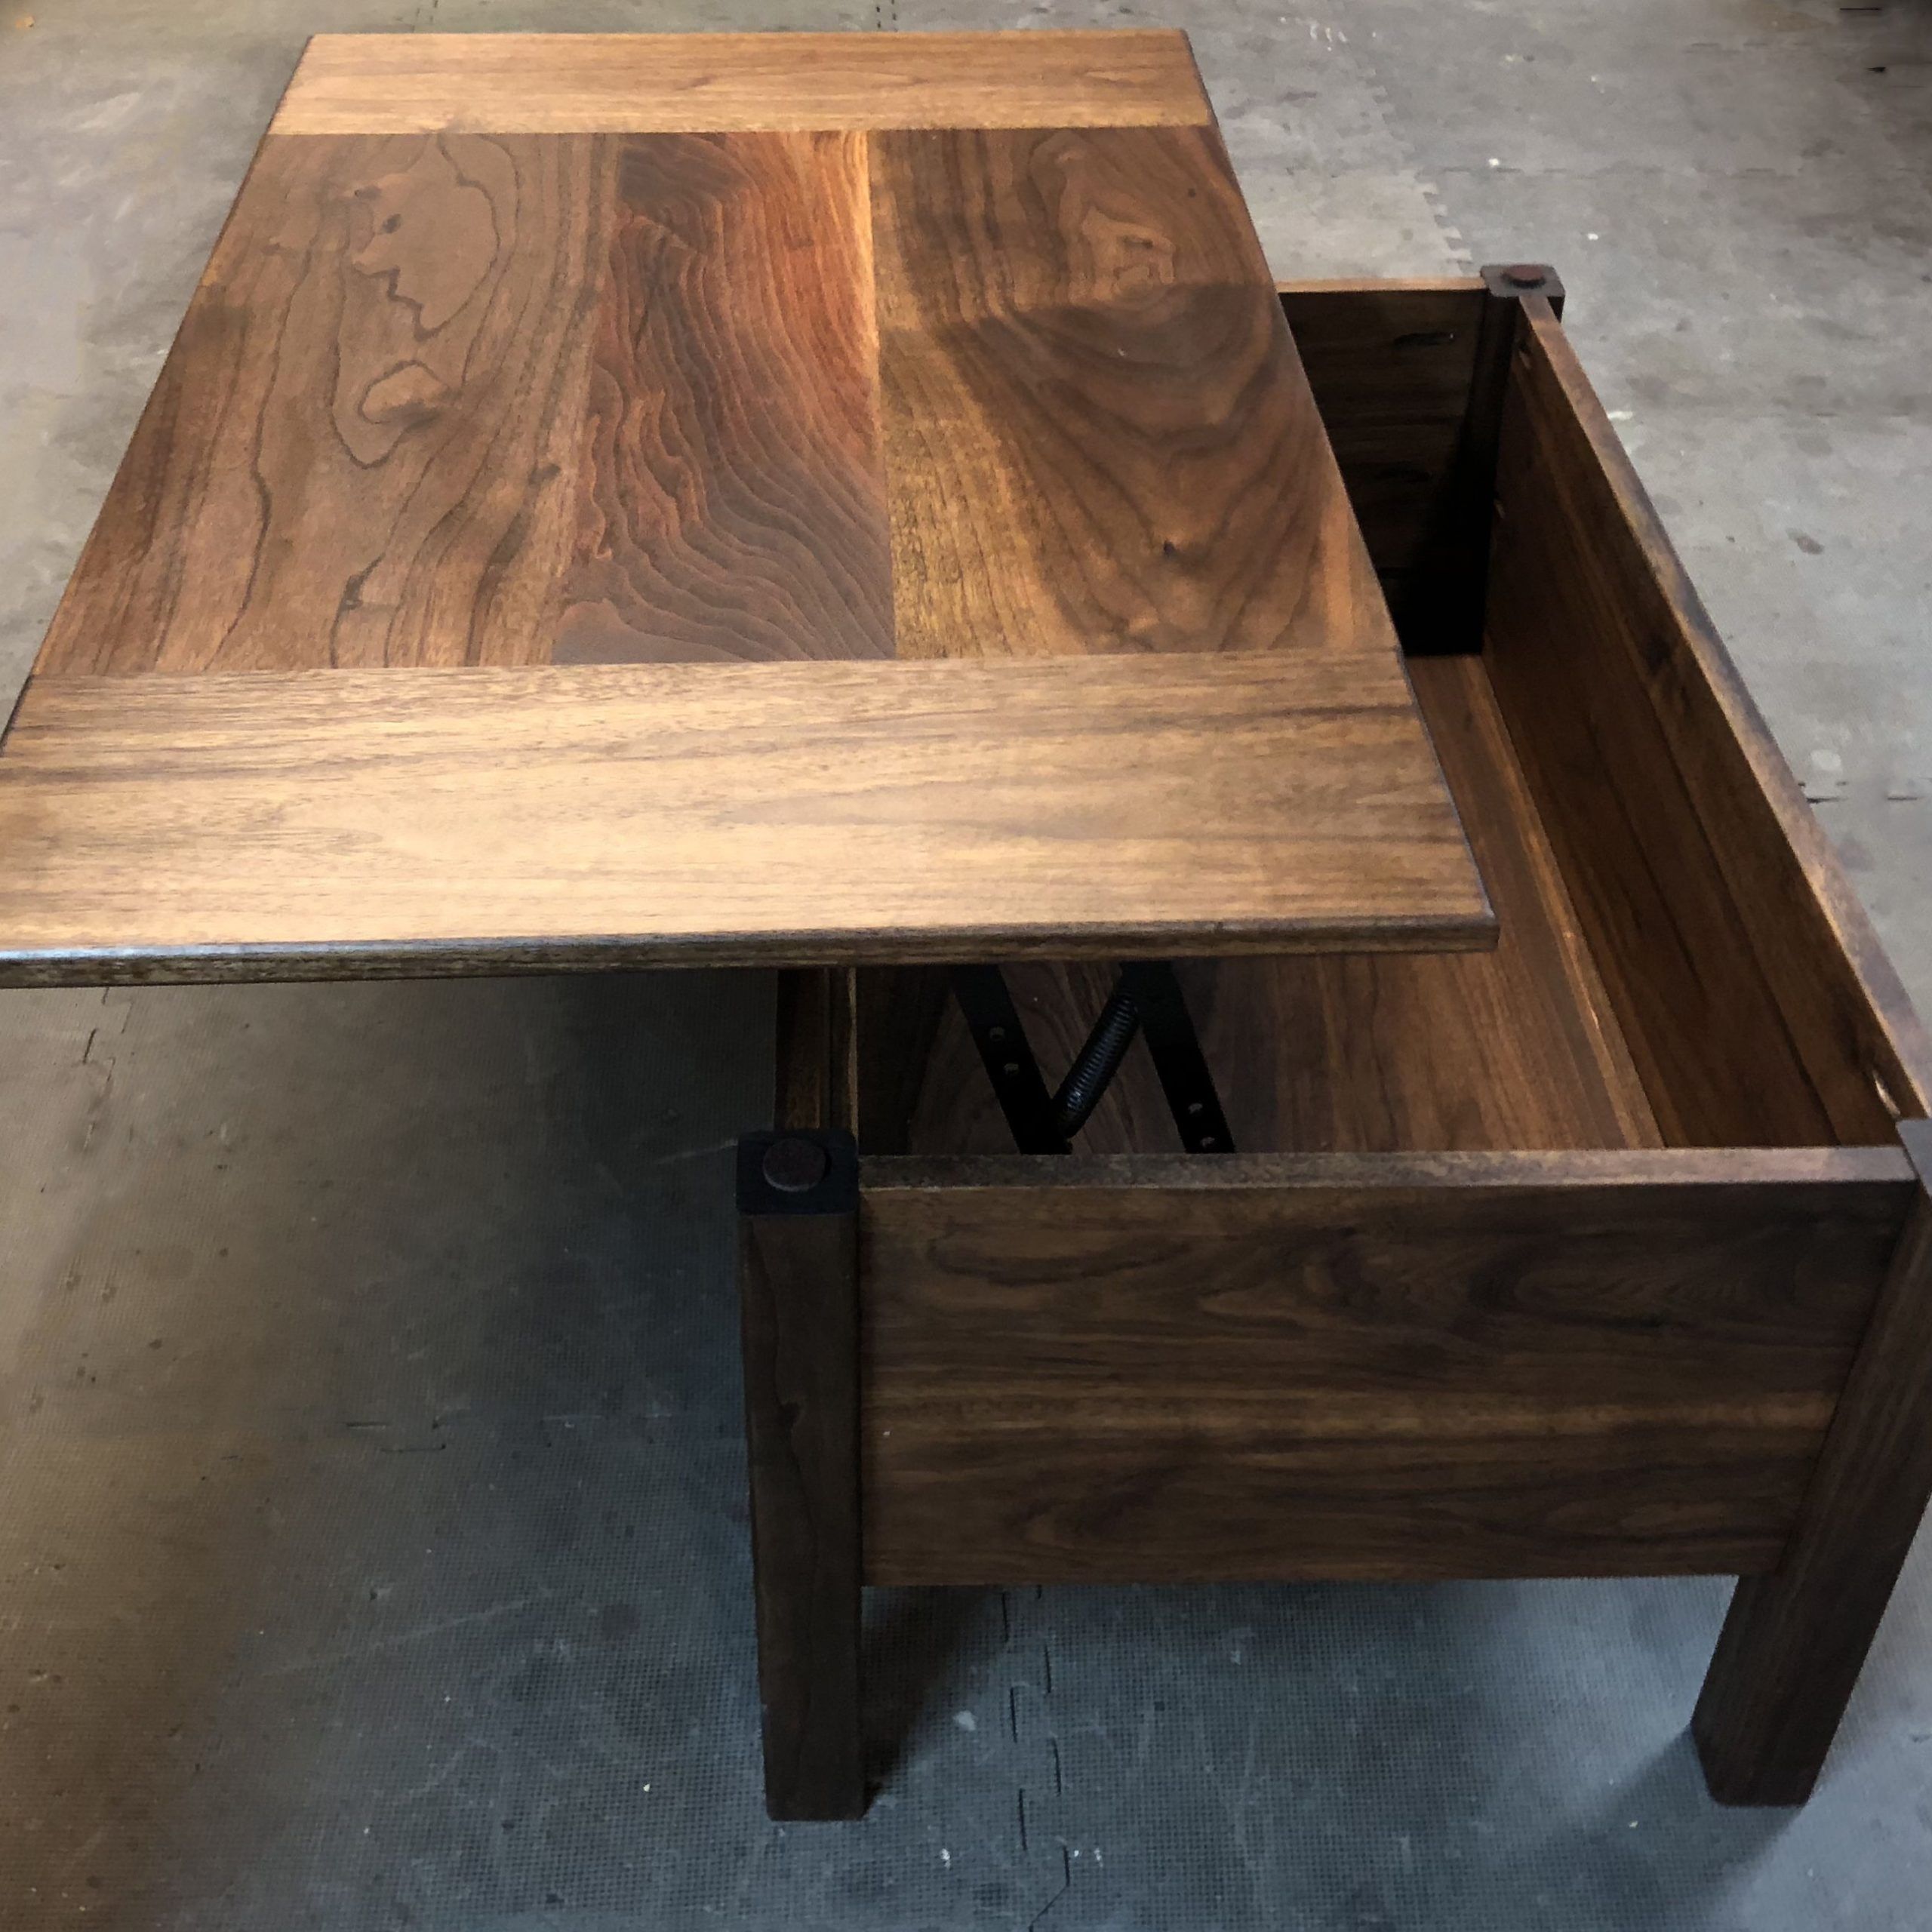 Buy Hand Made Lift Top Combination Storage Coffee Table And Desk Made From  Solid Hardwood Or Pine, Made To Order From Mr² Woodworking | Custommade Within Lift Top Coffee Tables With Storage (View 13 of 15)